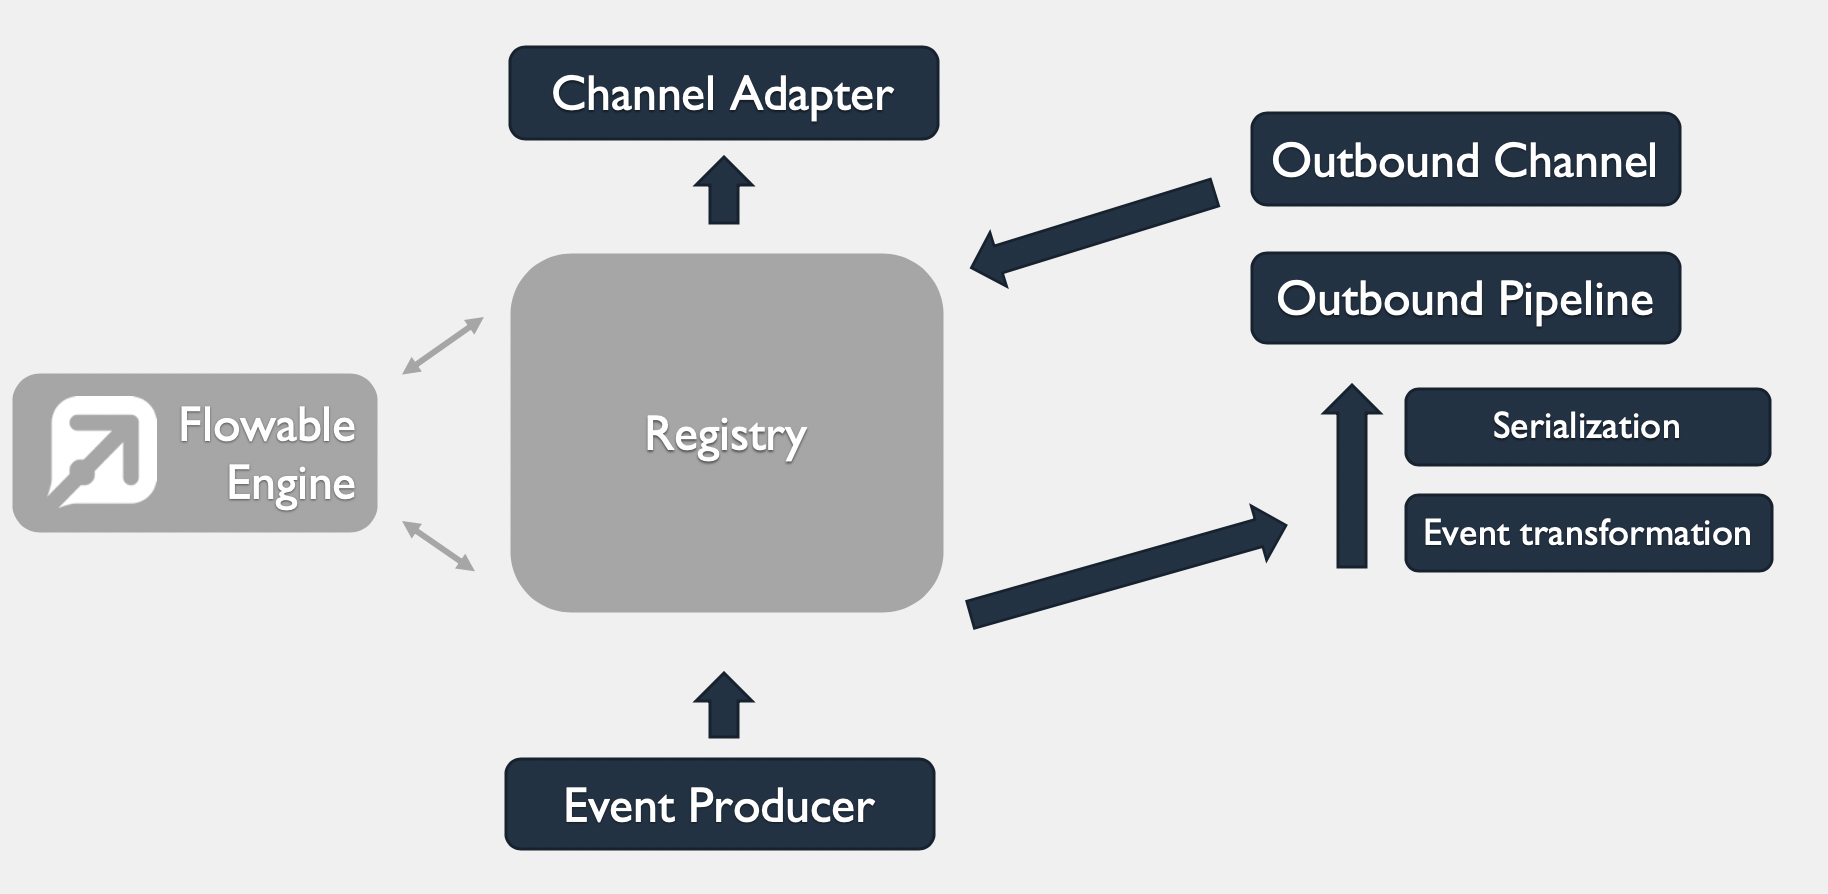 Outbound channel pipeline